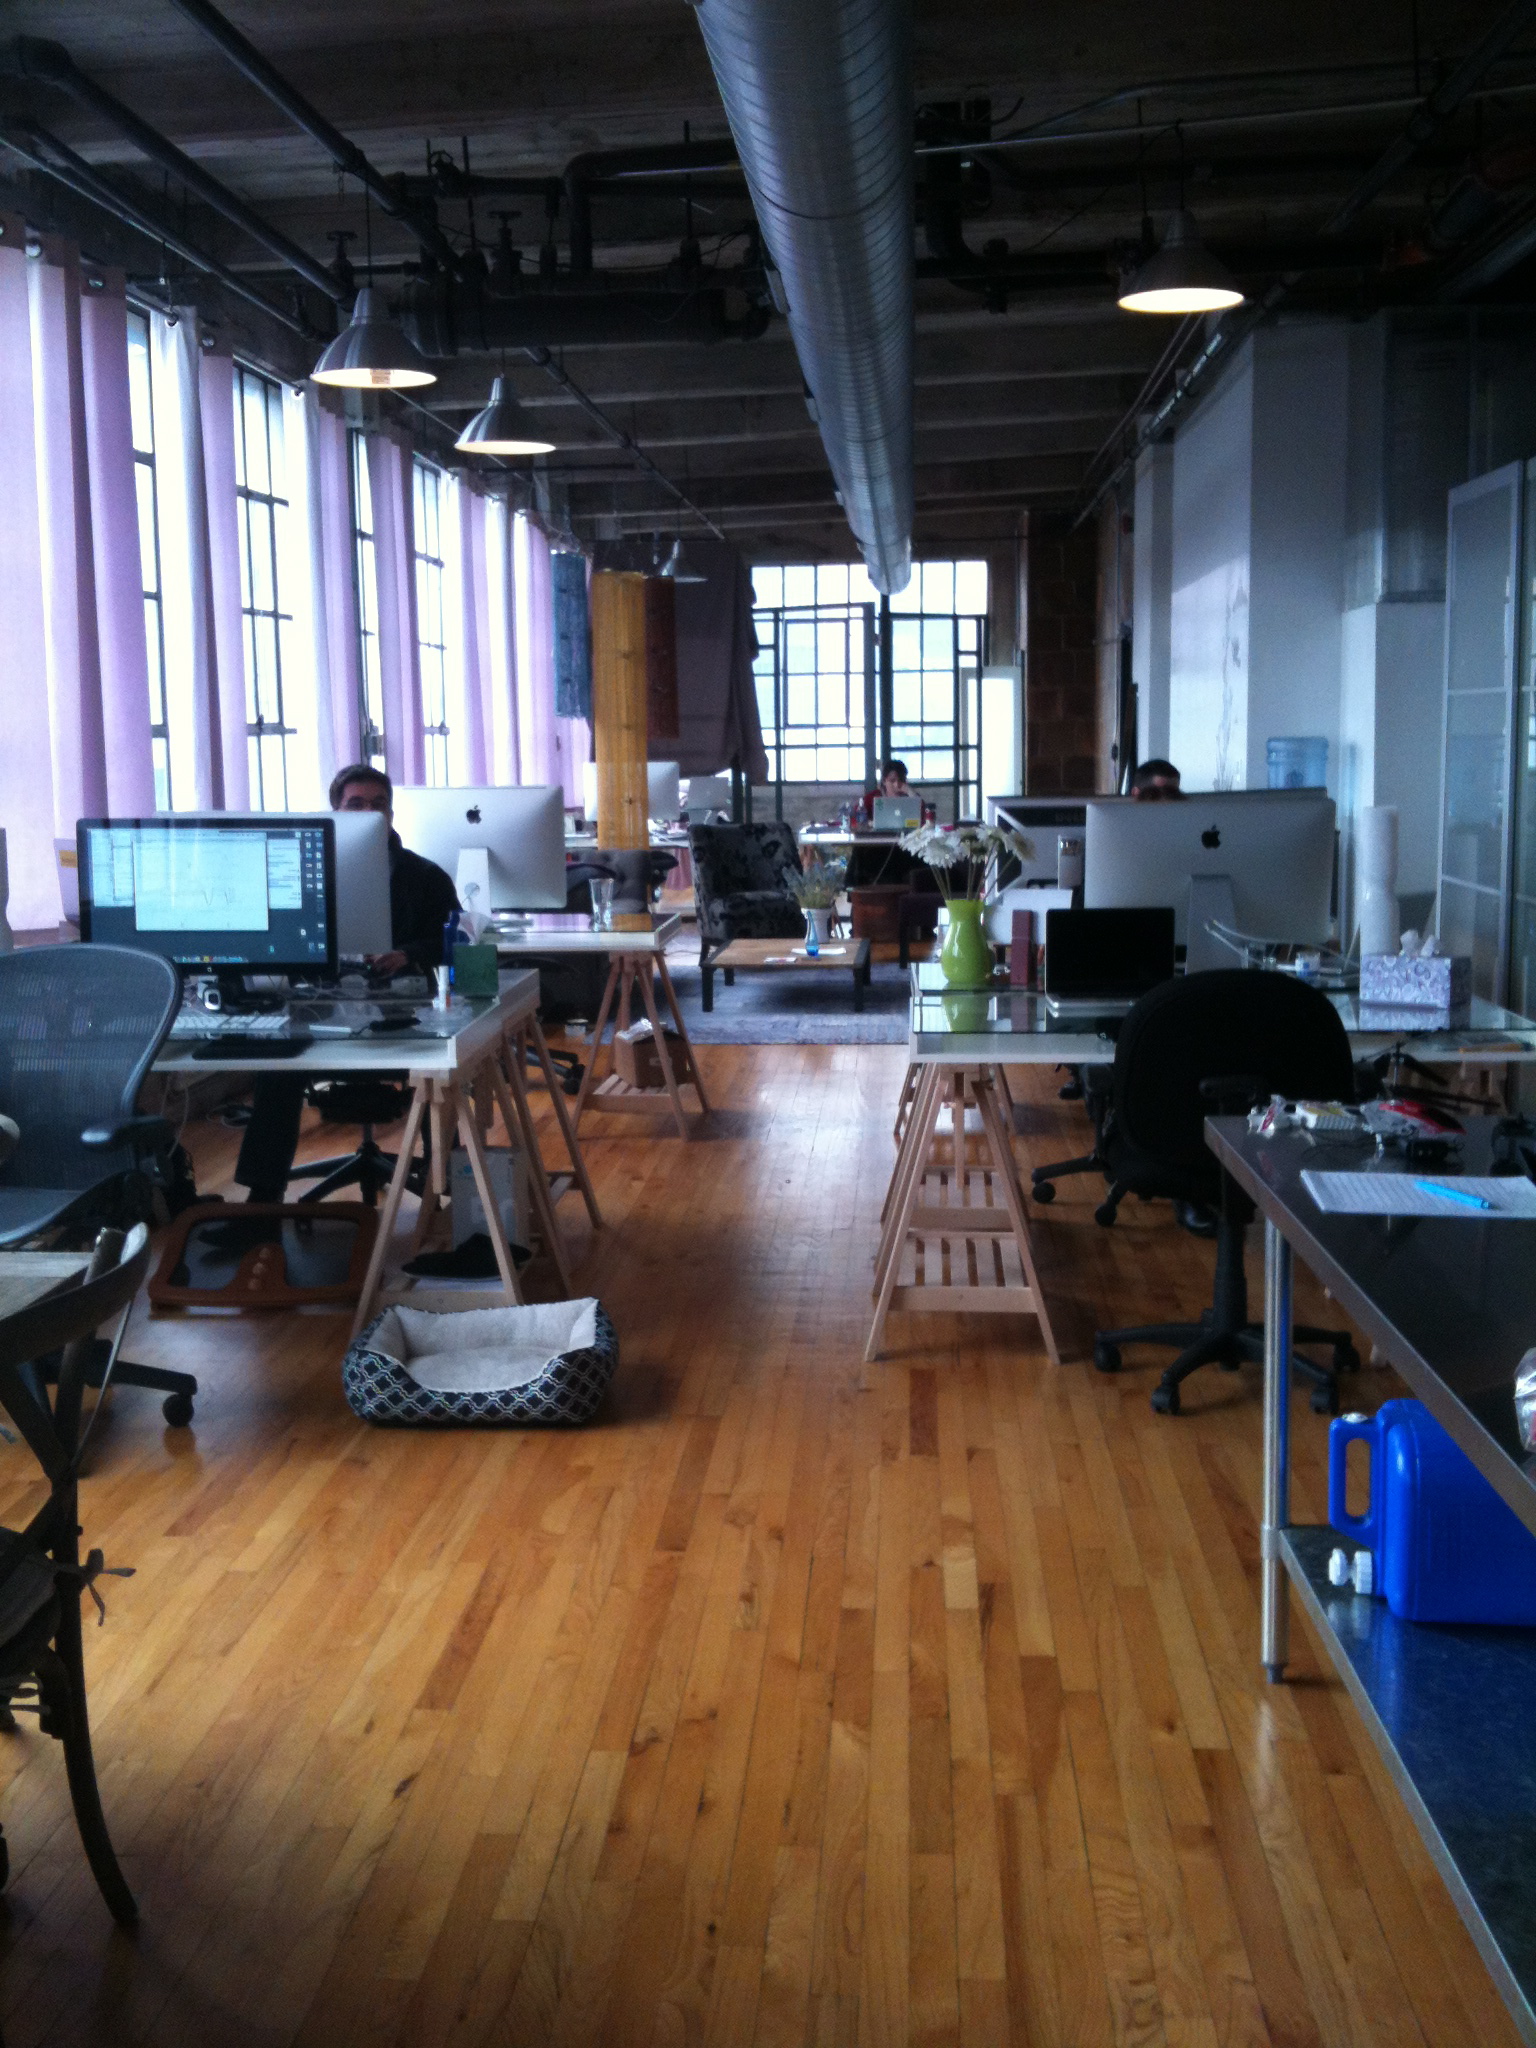 The Wildbit office on 3rd St. in Old City.